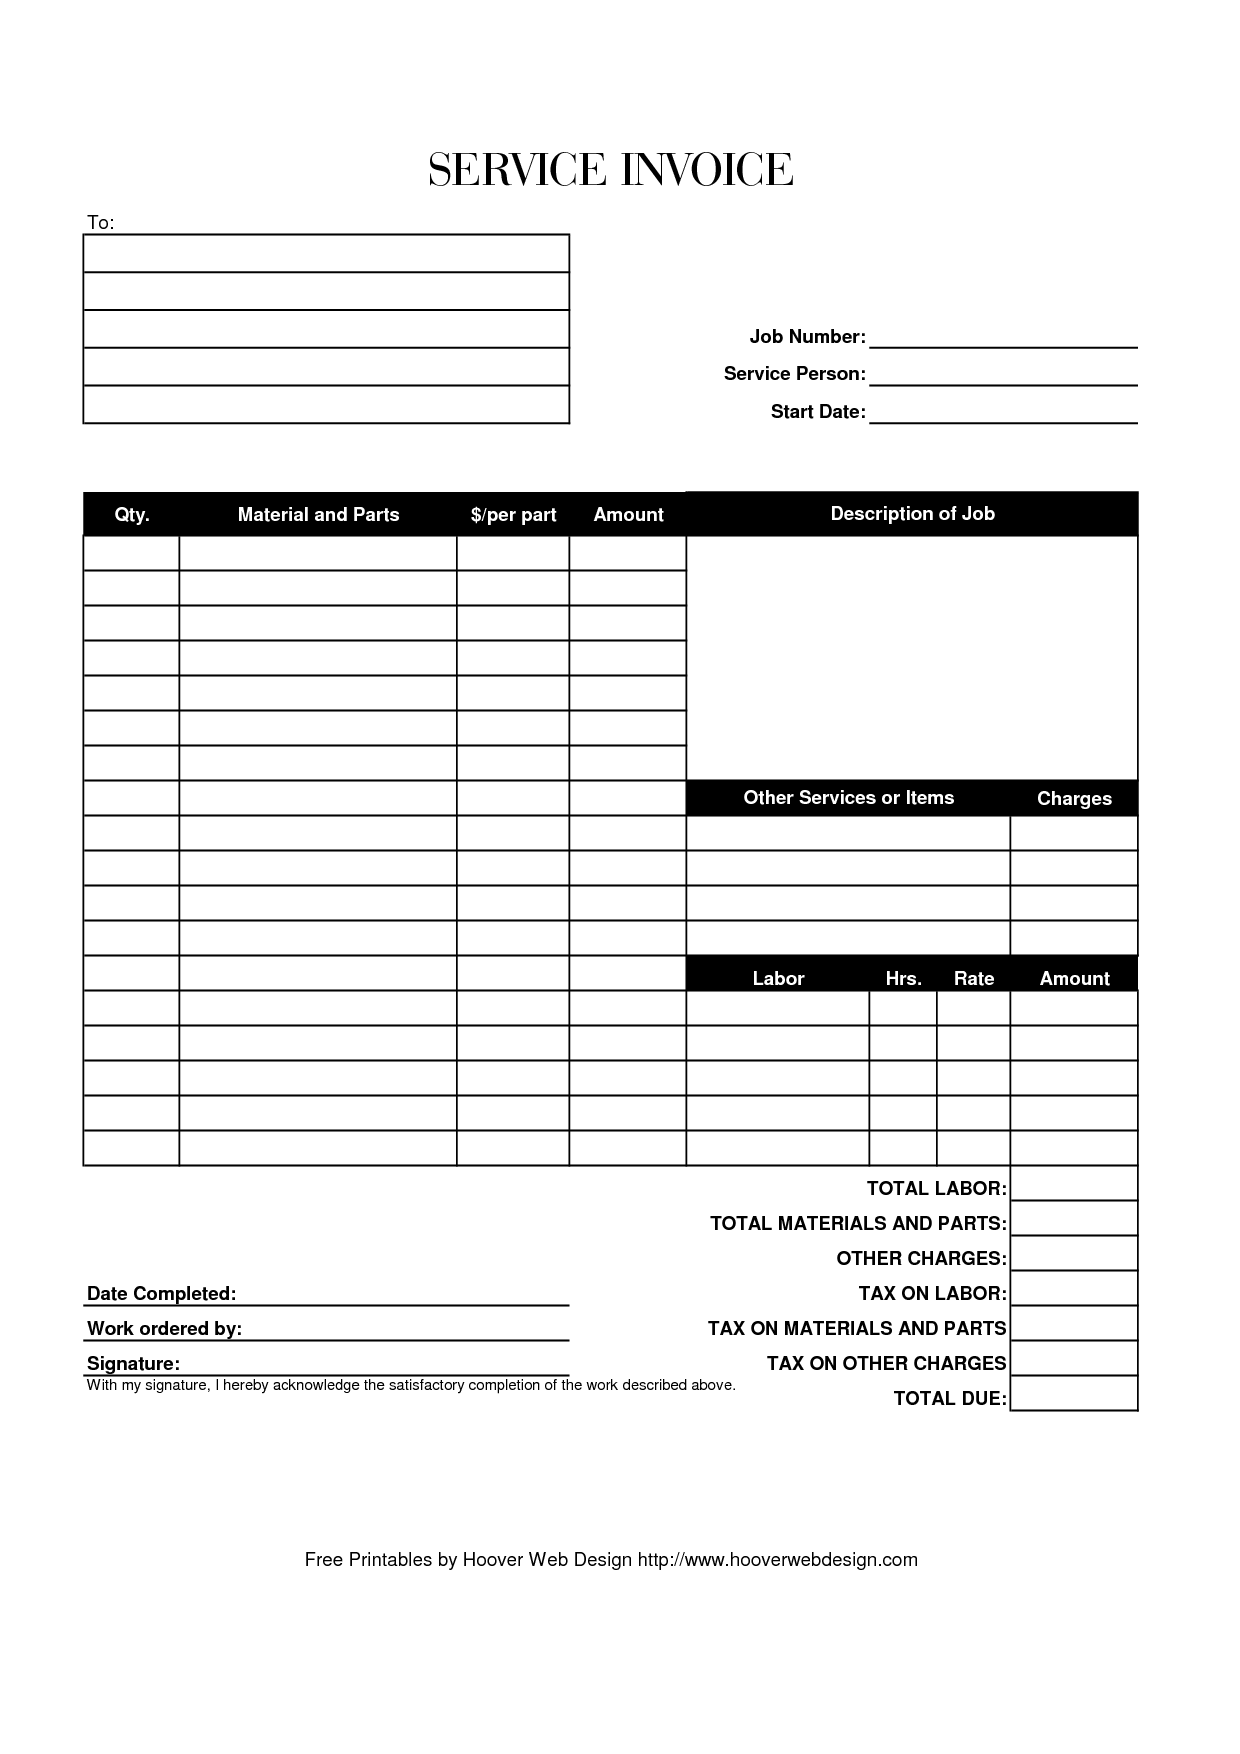 Hoover Receipts | Free Printable Service Invoice Template   PDF 